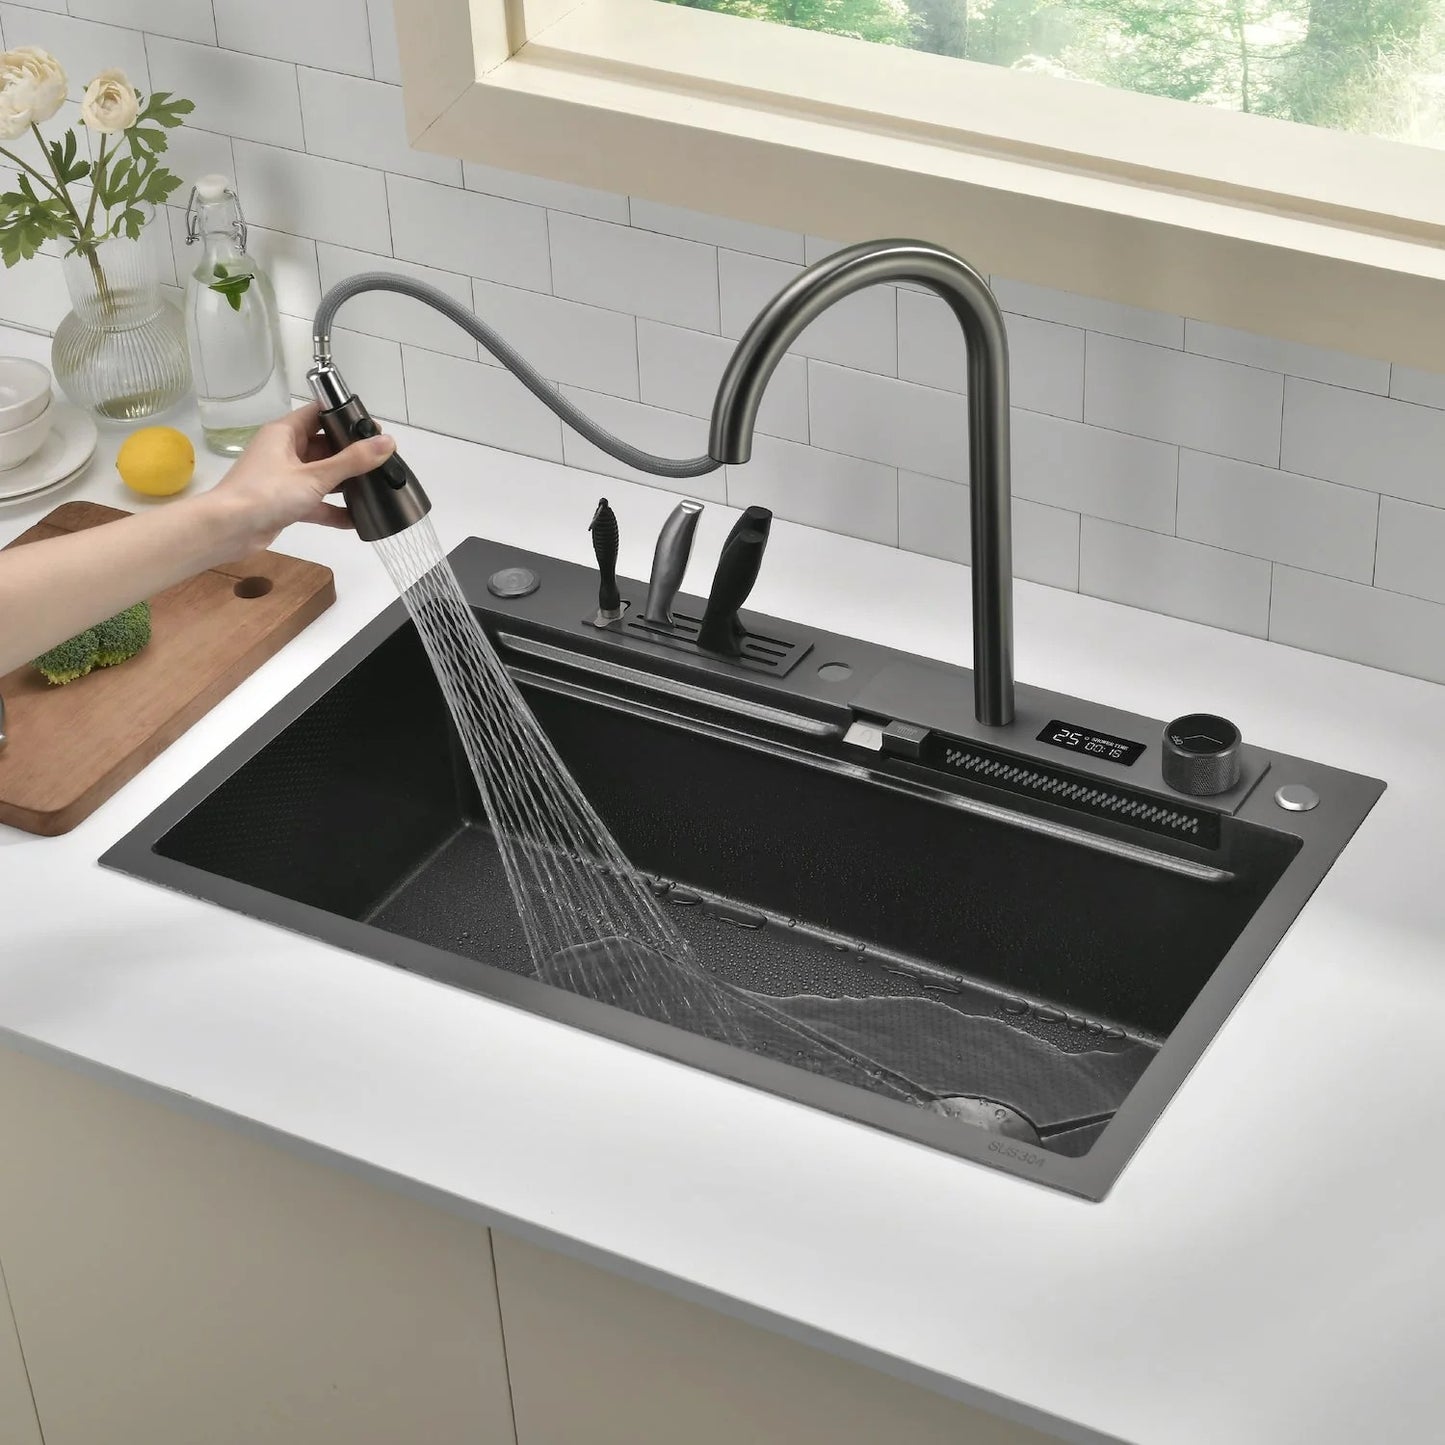 Aqua Waterfall Workstation Kitchen Sink Set with Digital Temperature Display and Knife Holder